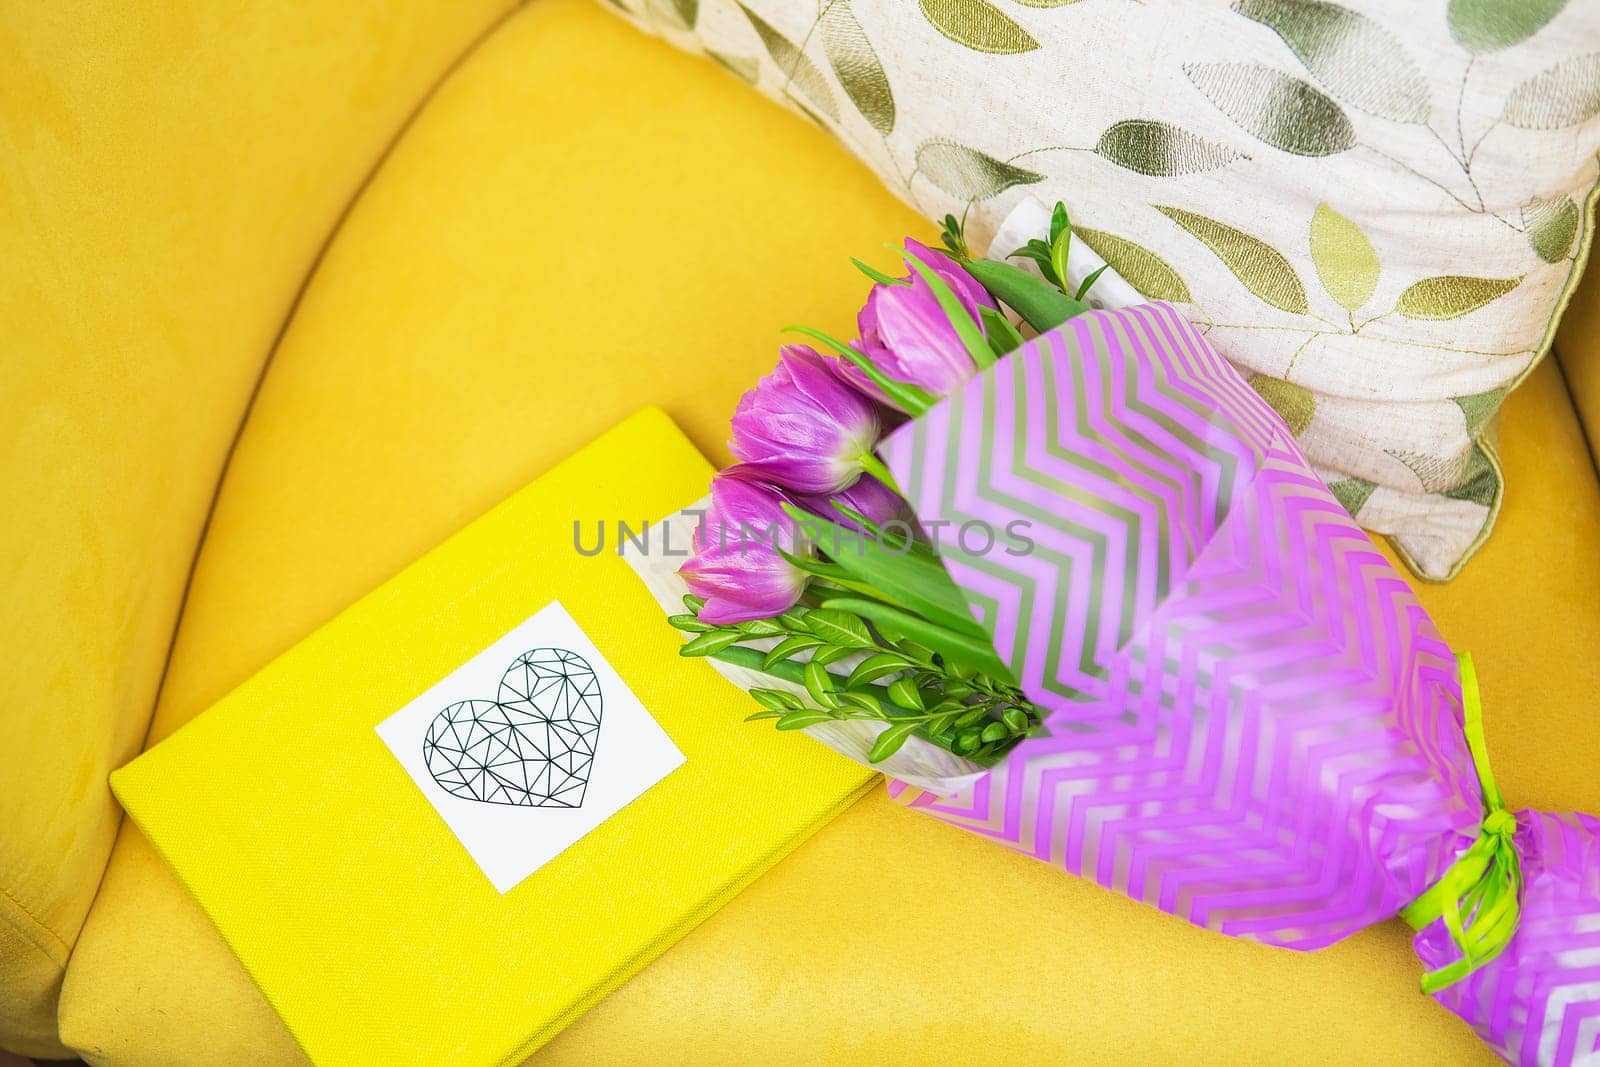 beautiful violet bouquet of tulips on a yellow stool and yellow book.